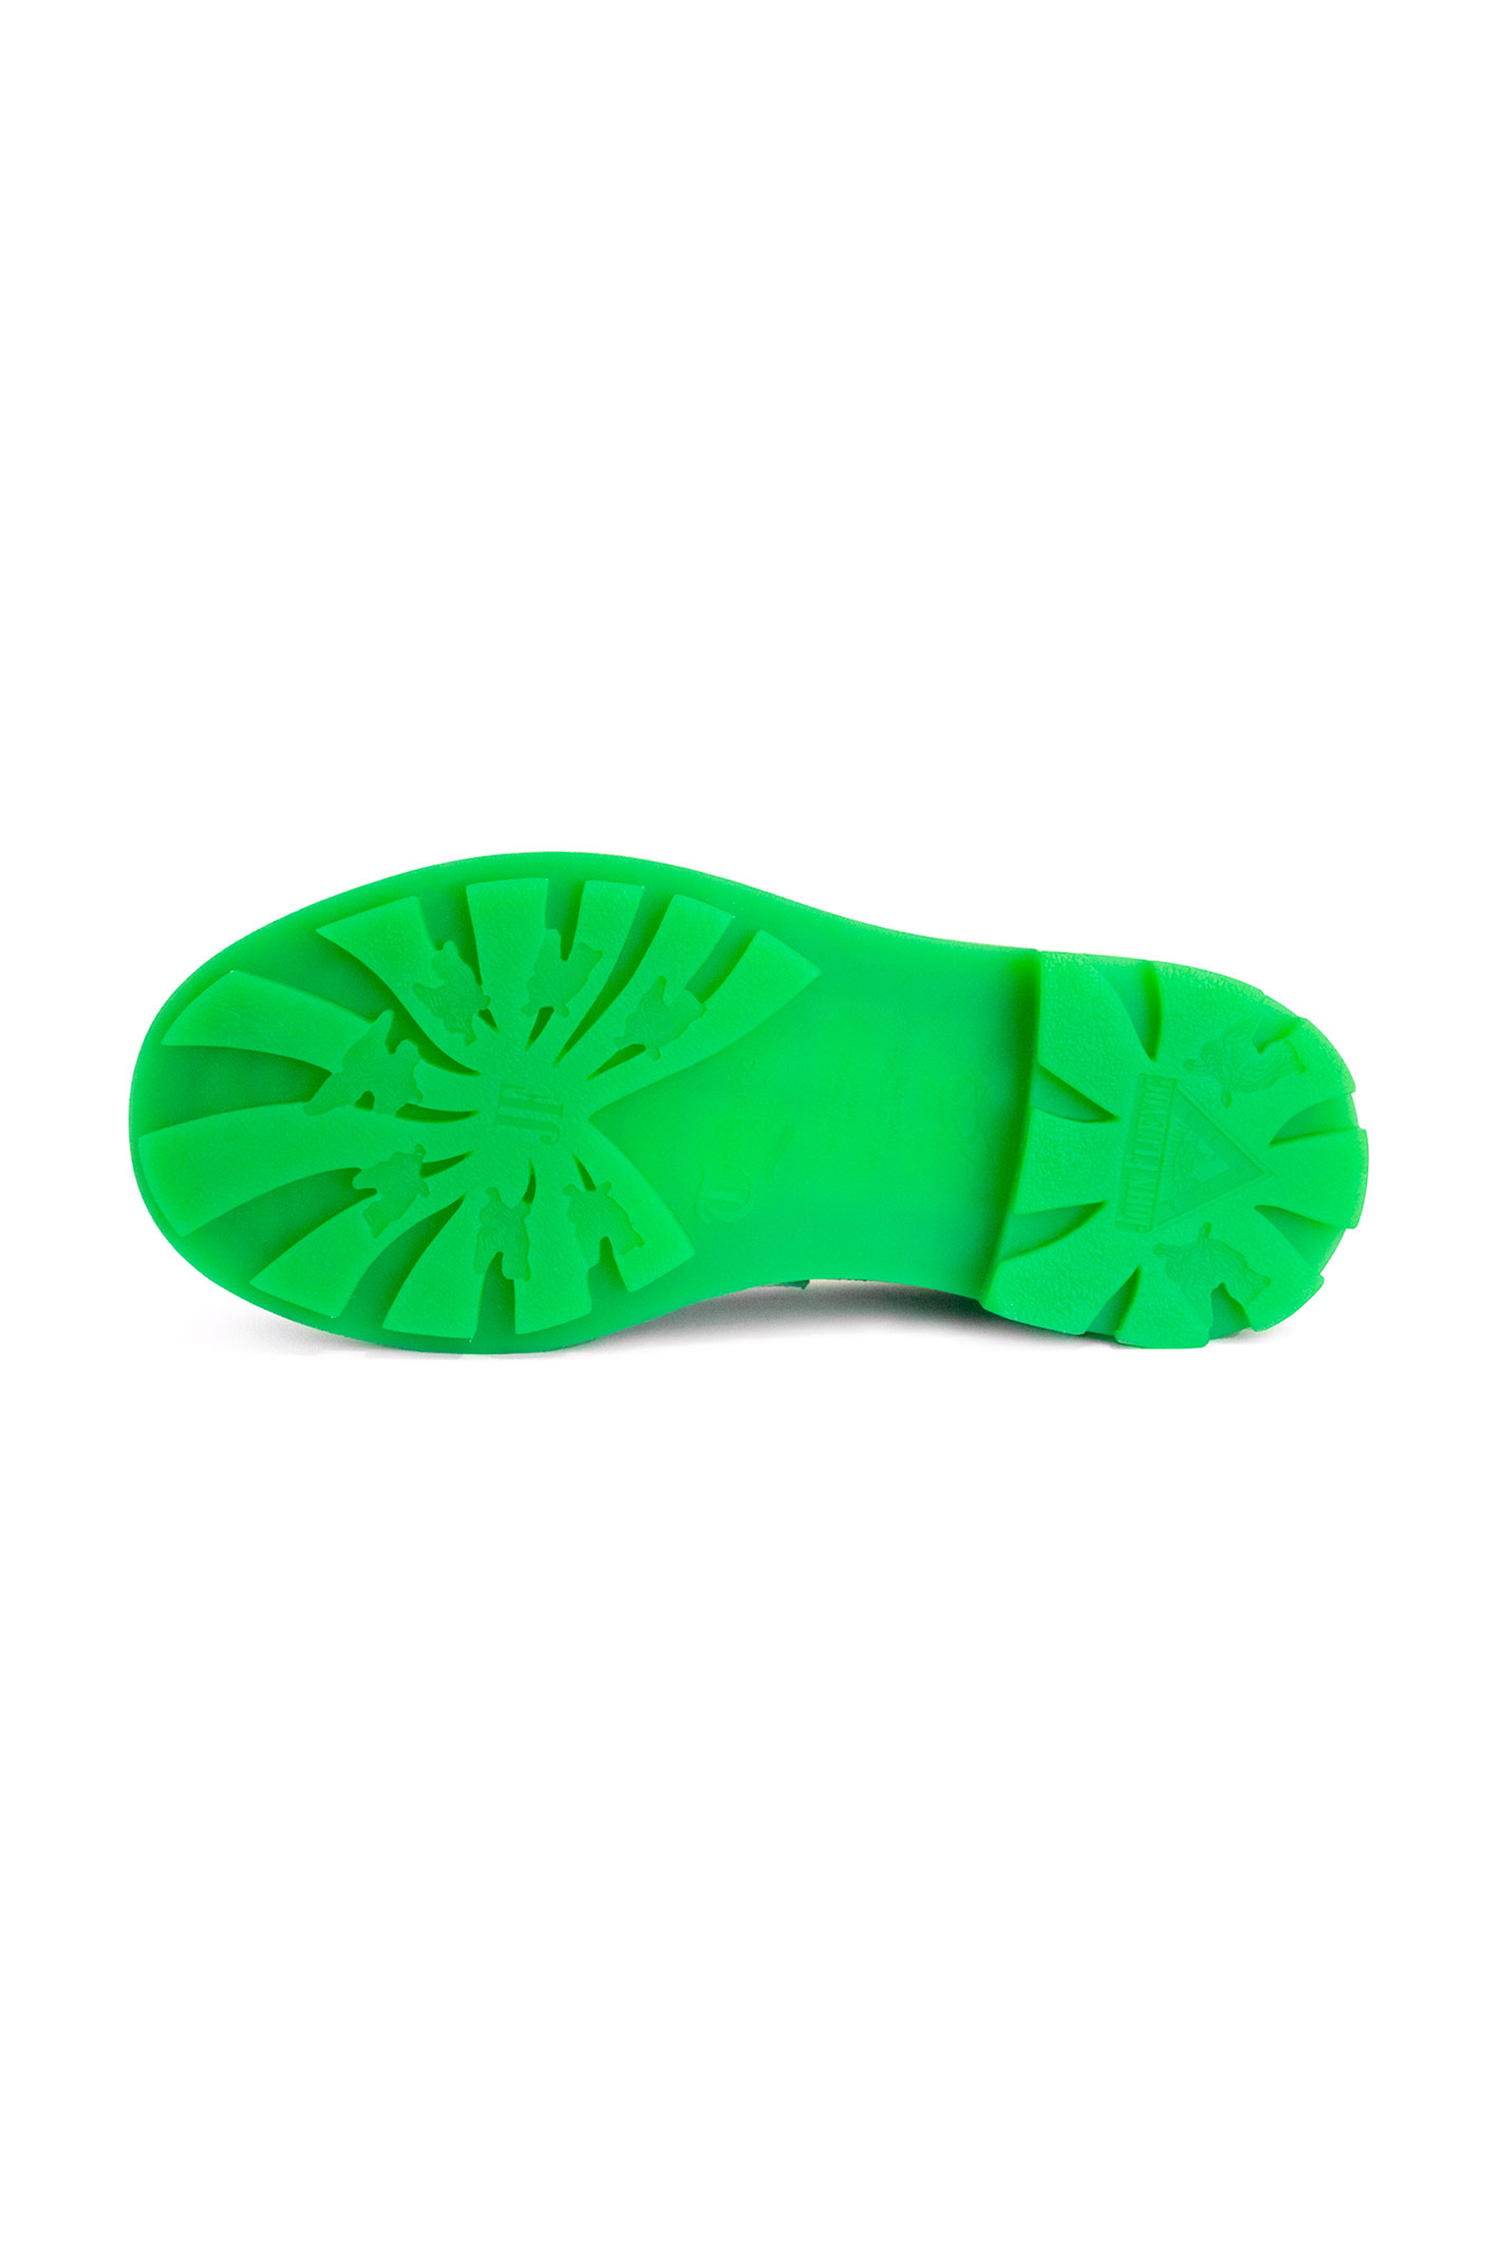 The under sole is in the same glo green, large bevel material to have a good stability on any ground 